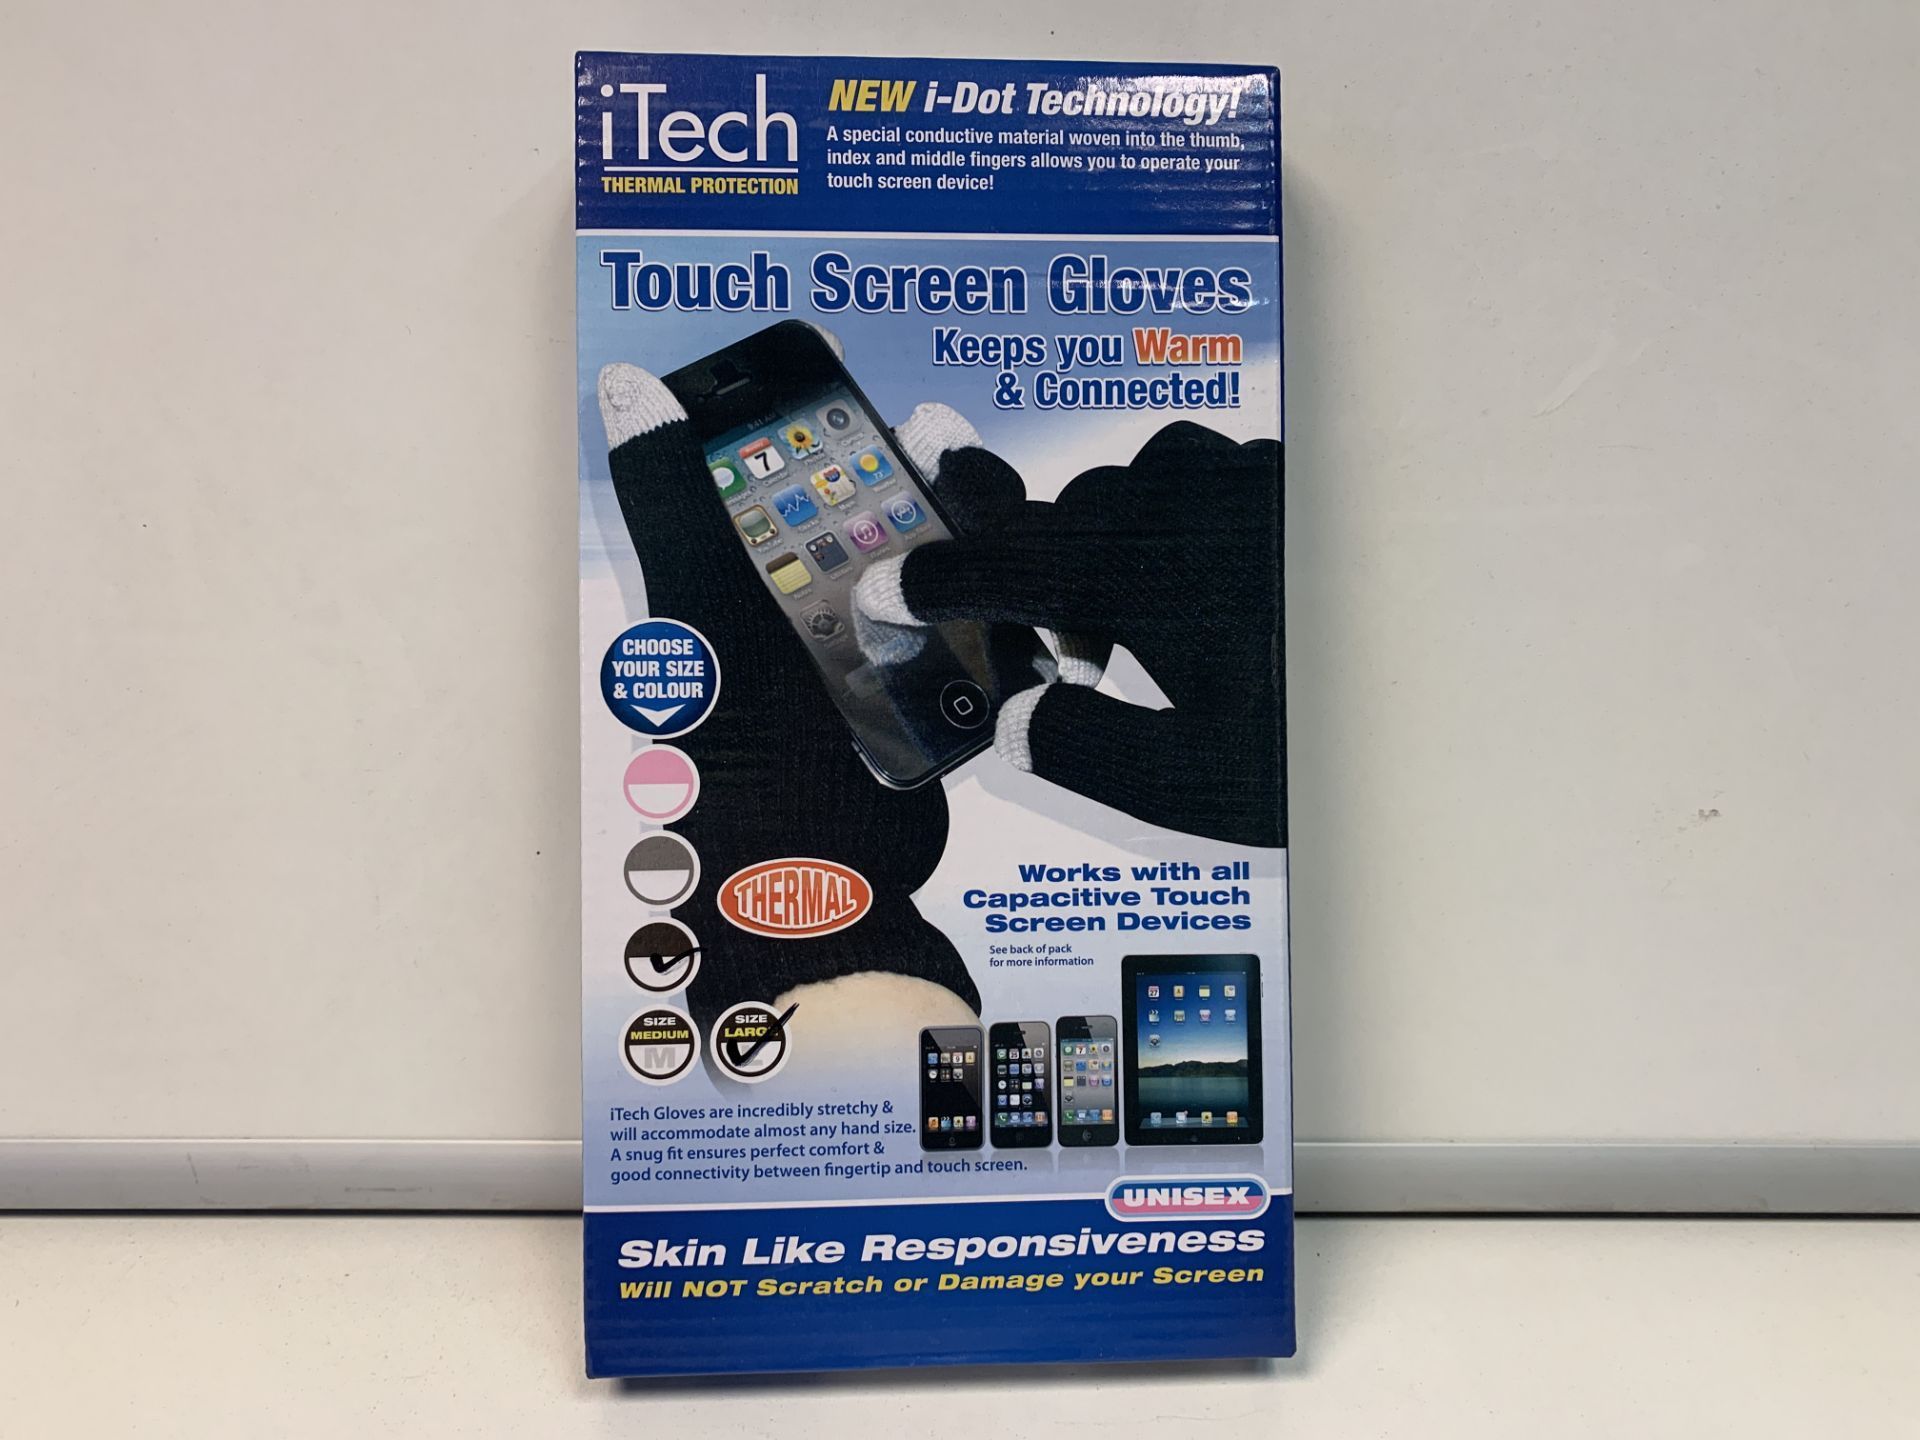 36 X NEW BOXED Pairs of iTECH Thermal Protection Touch Screen Gloves. Keep you warm and connected!